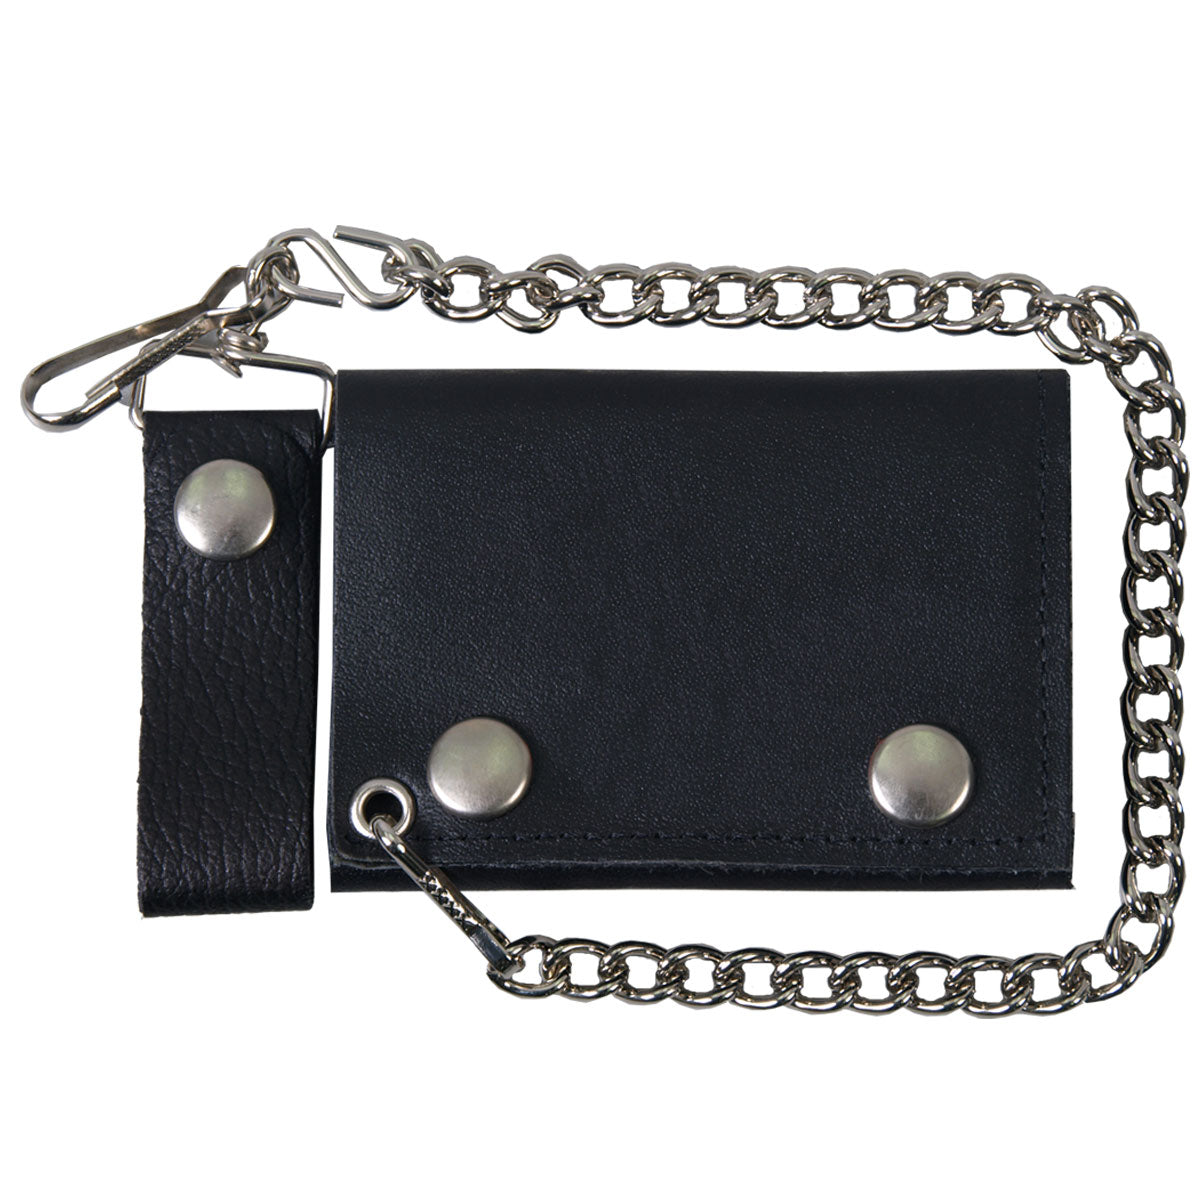 Hot Leathers WLB1001 Classic Black Leather Wallet with Chain